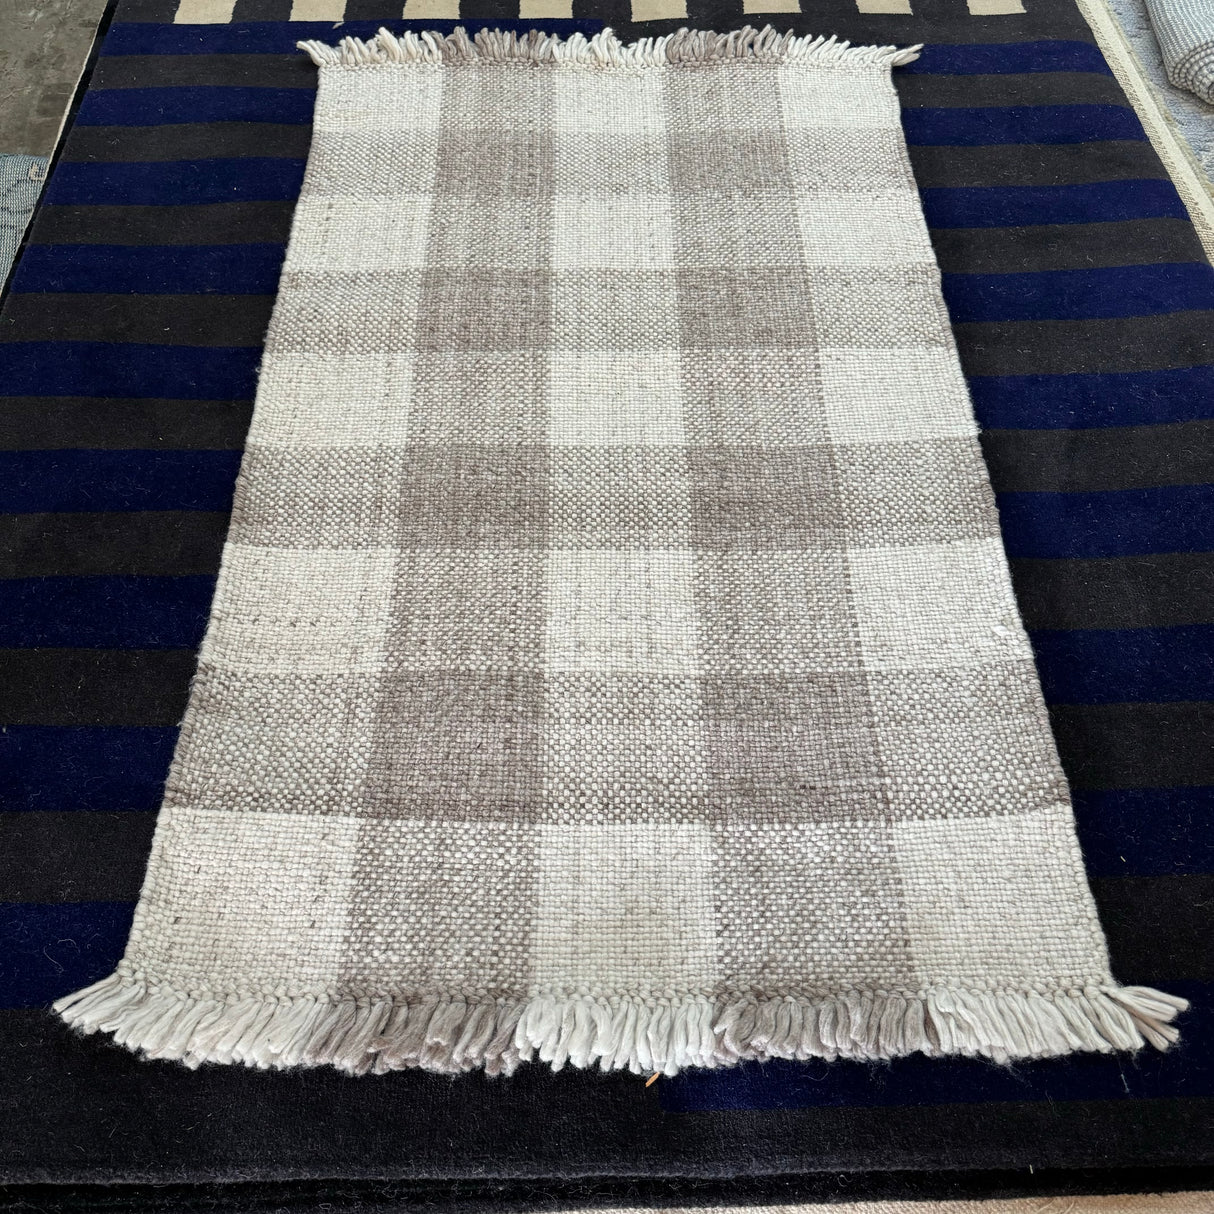 Serena and Lily 3X5 Gingham Rug